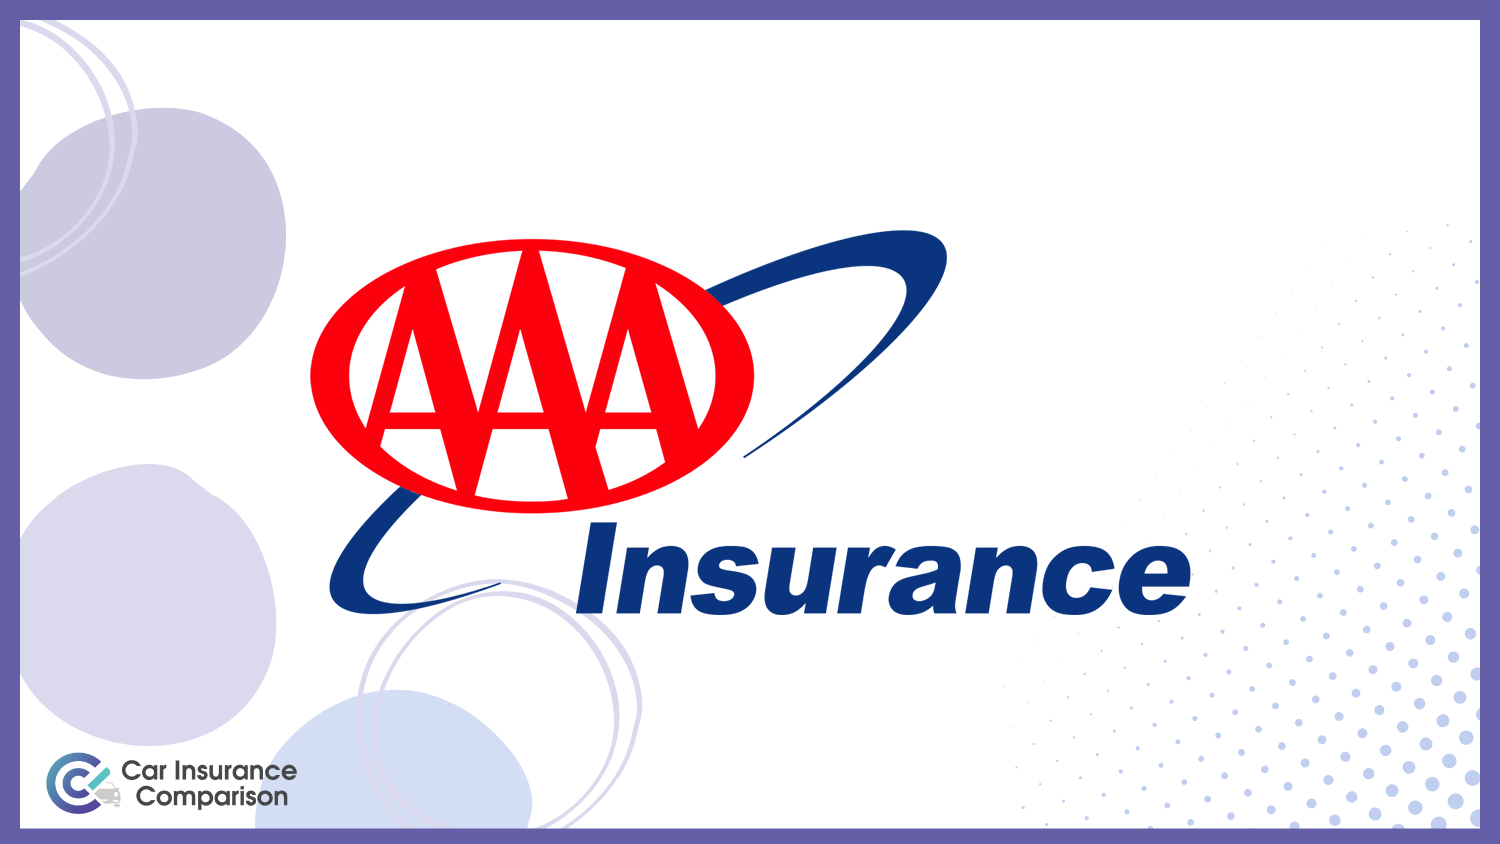 AAA: Compare Professional Engineer Car Insurance Rates